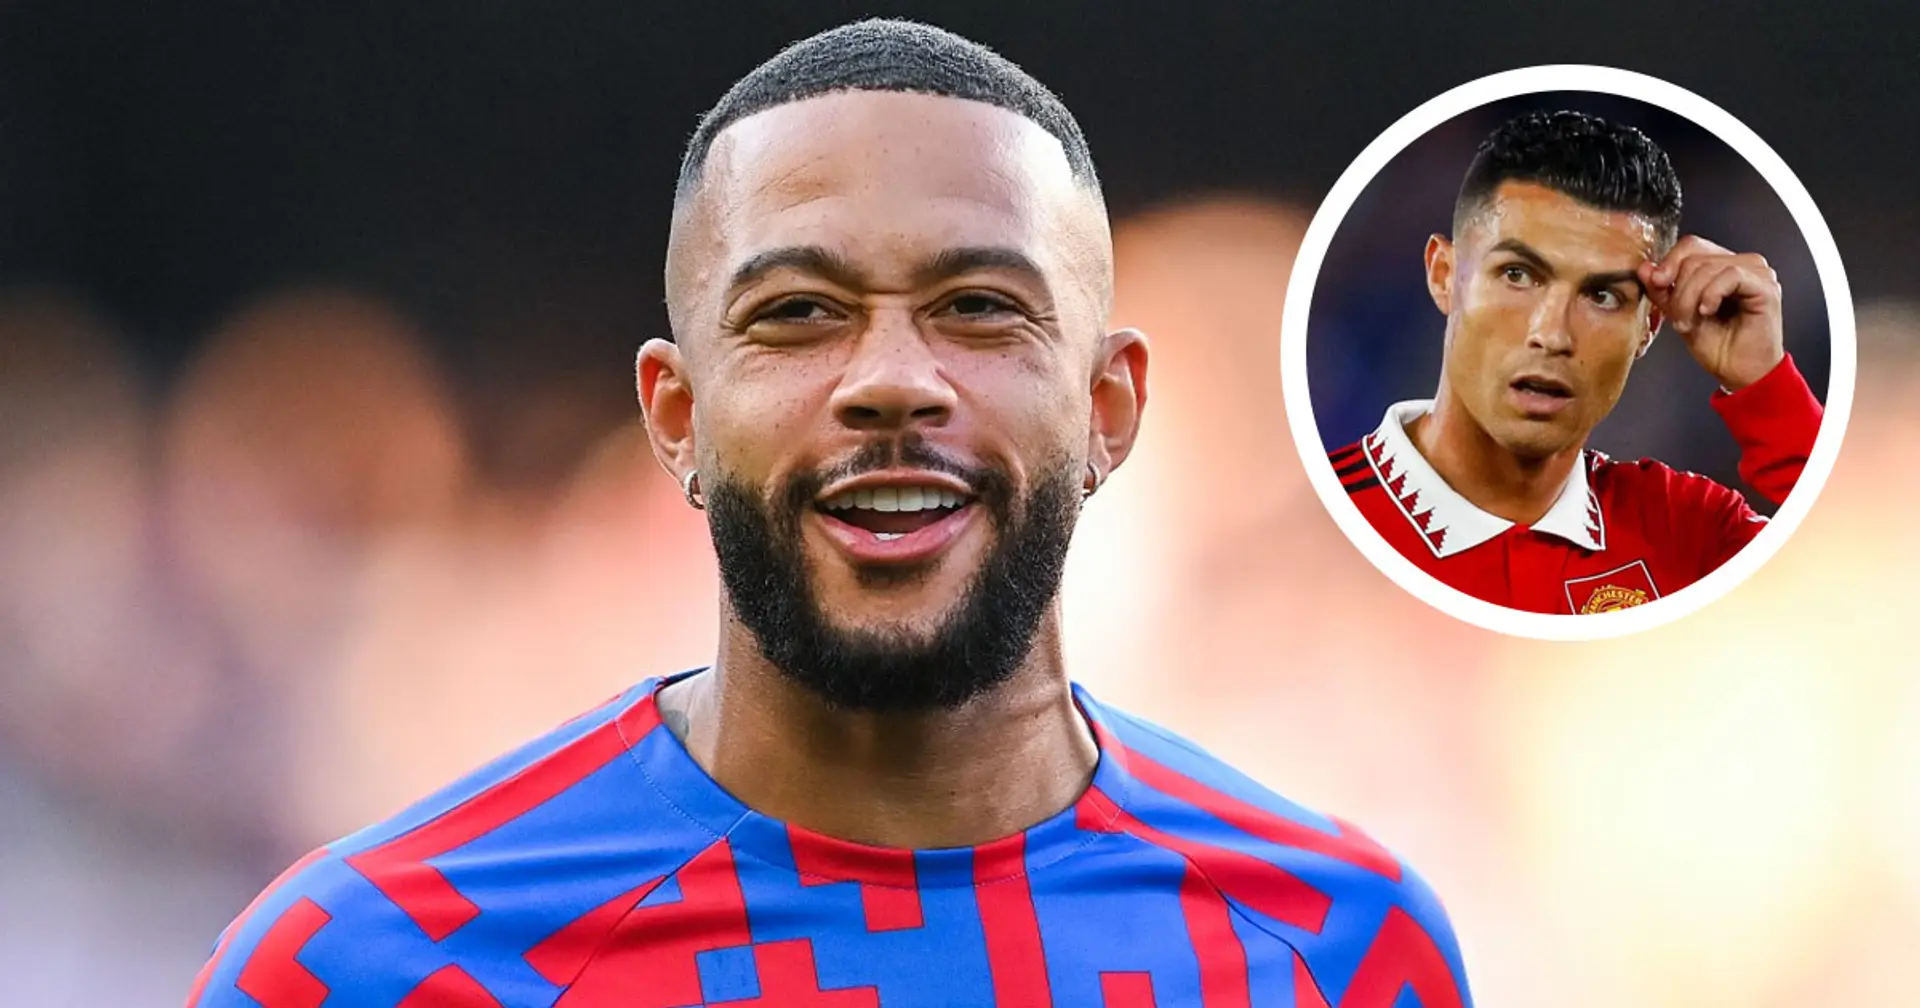 Man United 'accelerate plans' to sign Memphis Depay as Ronaldo replacement (reliability: 4 stars)